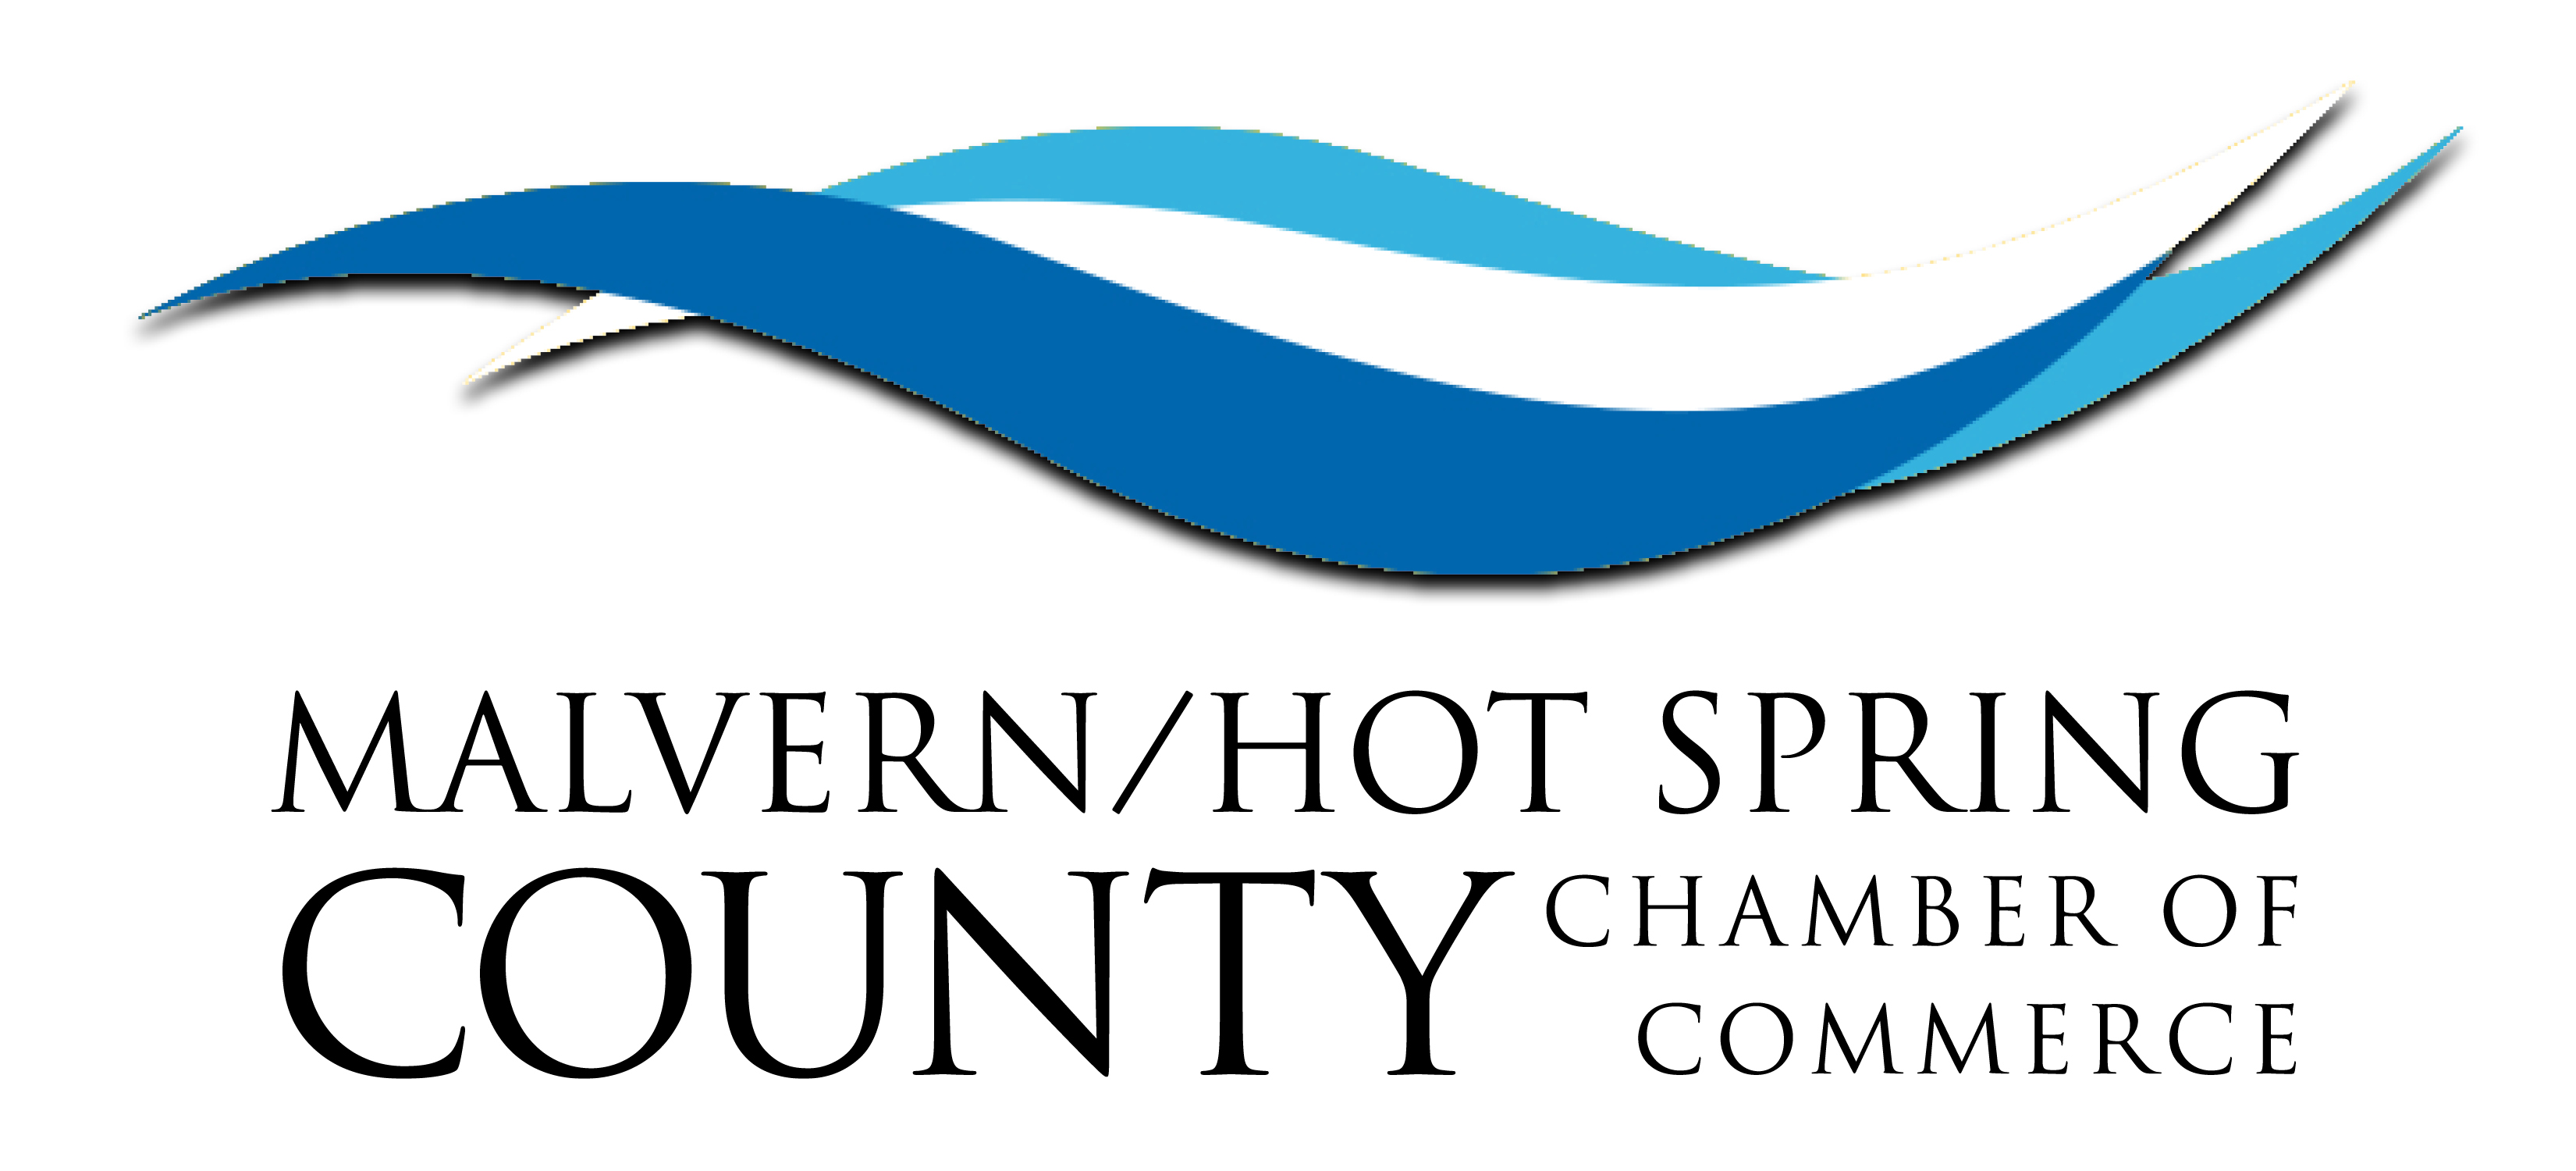 Malvern/Hot Spring County Chamber of Commerce